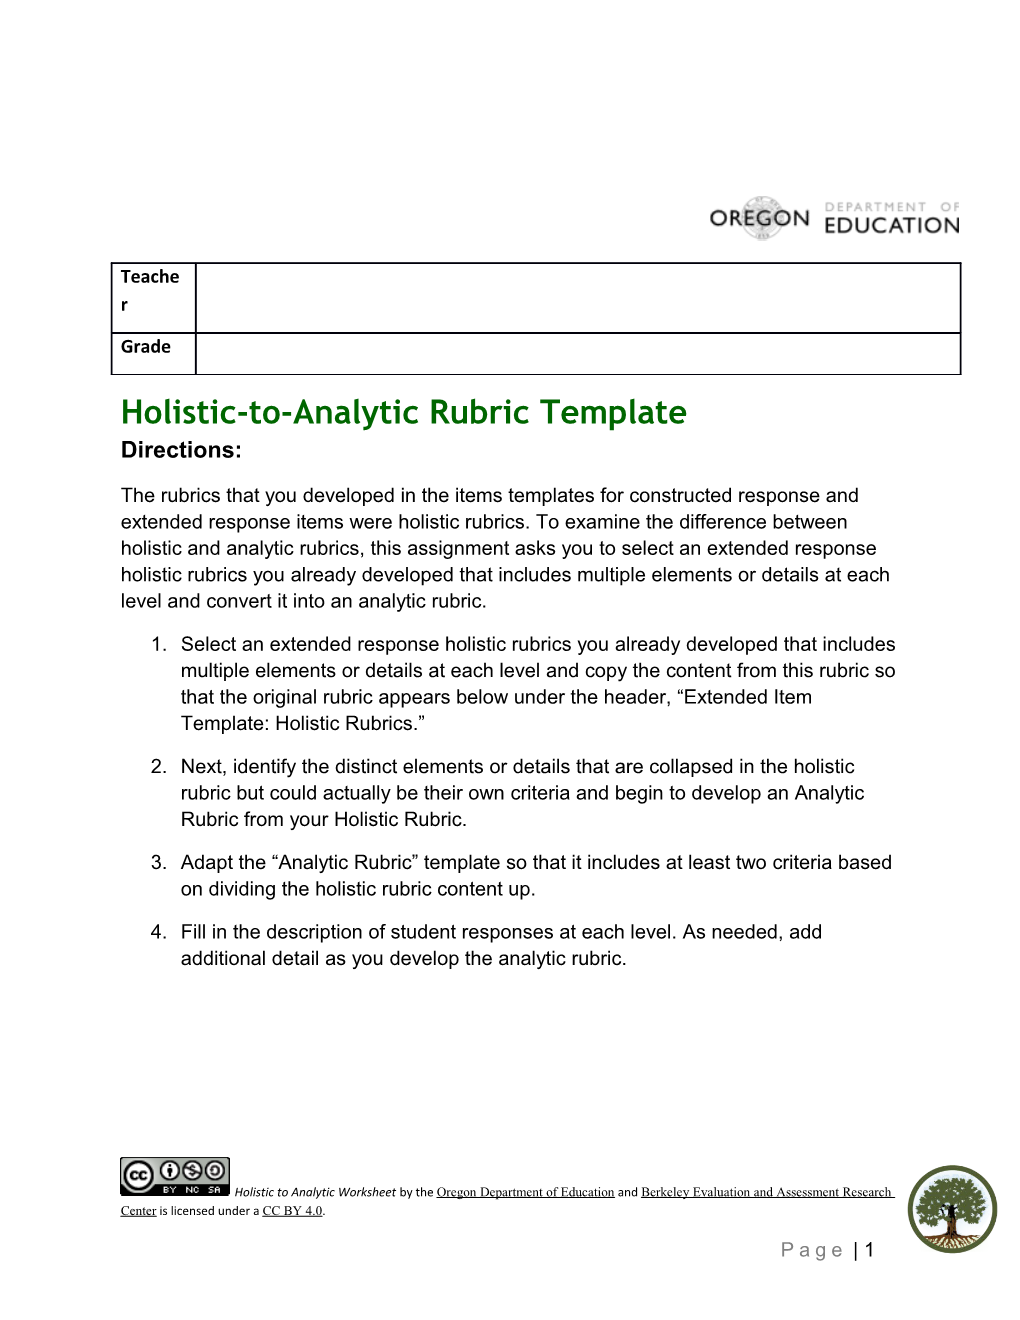 Holistic to Analytic Rubric Template Worksheet